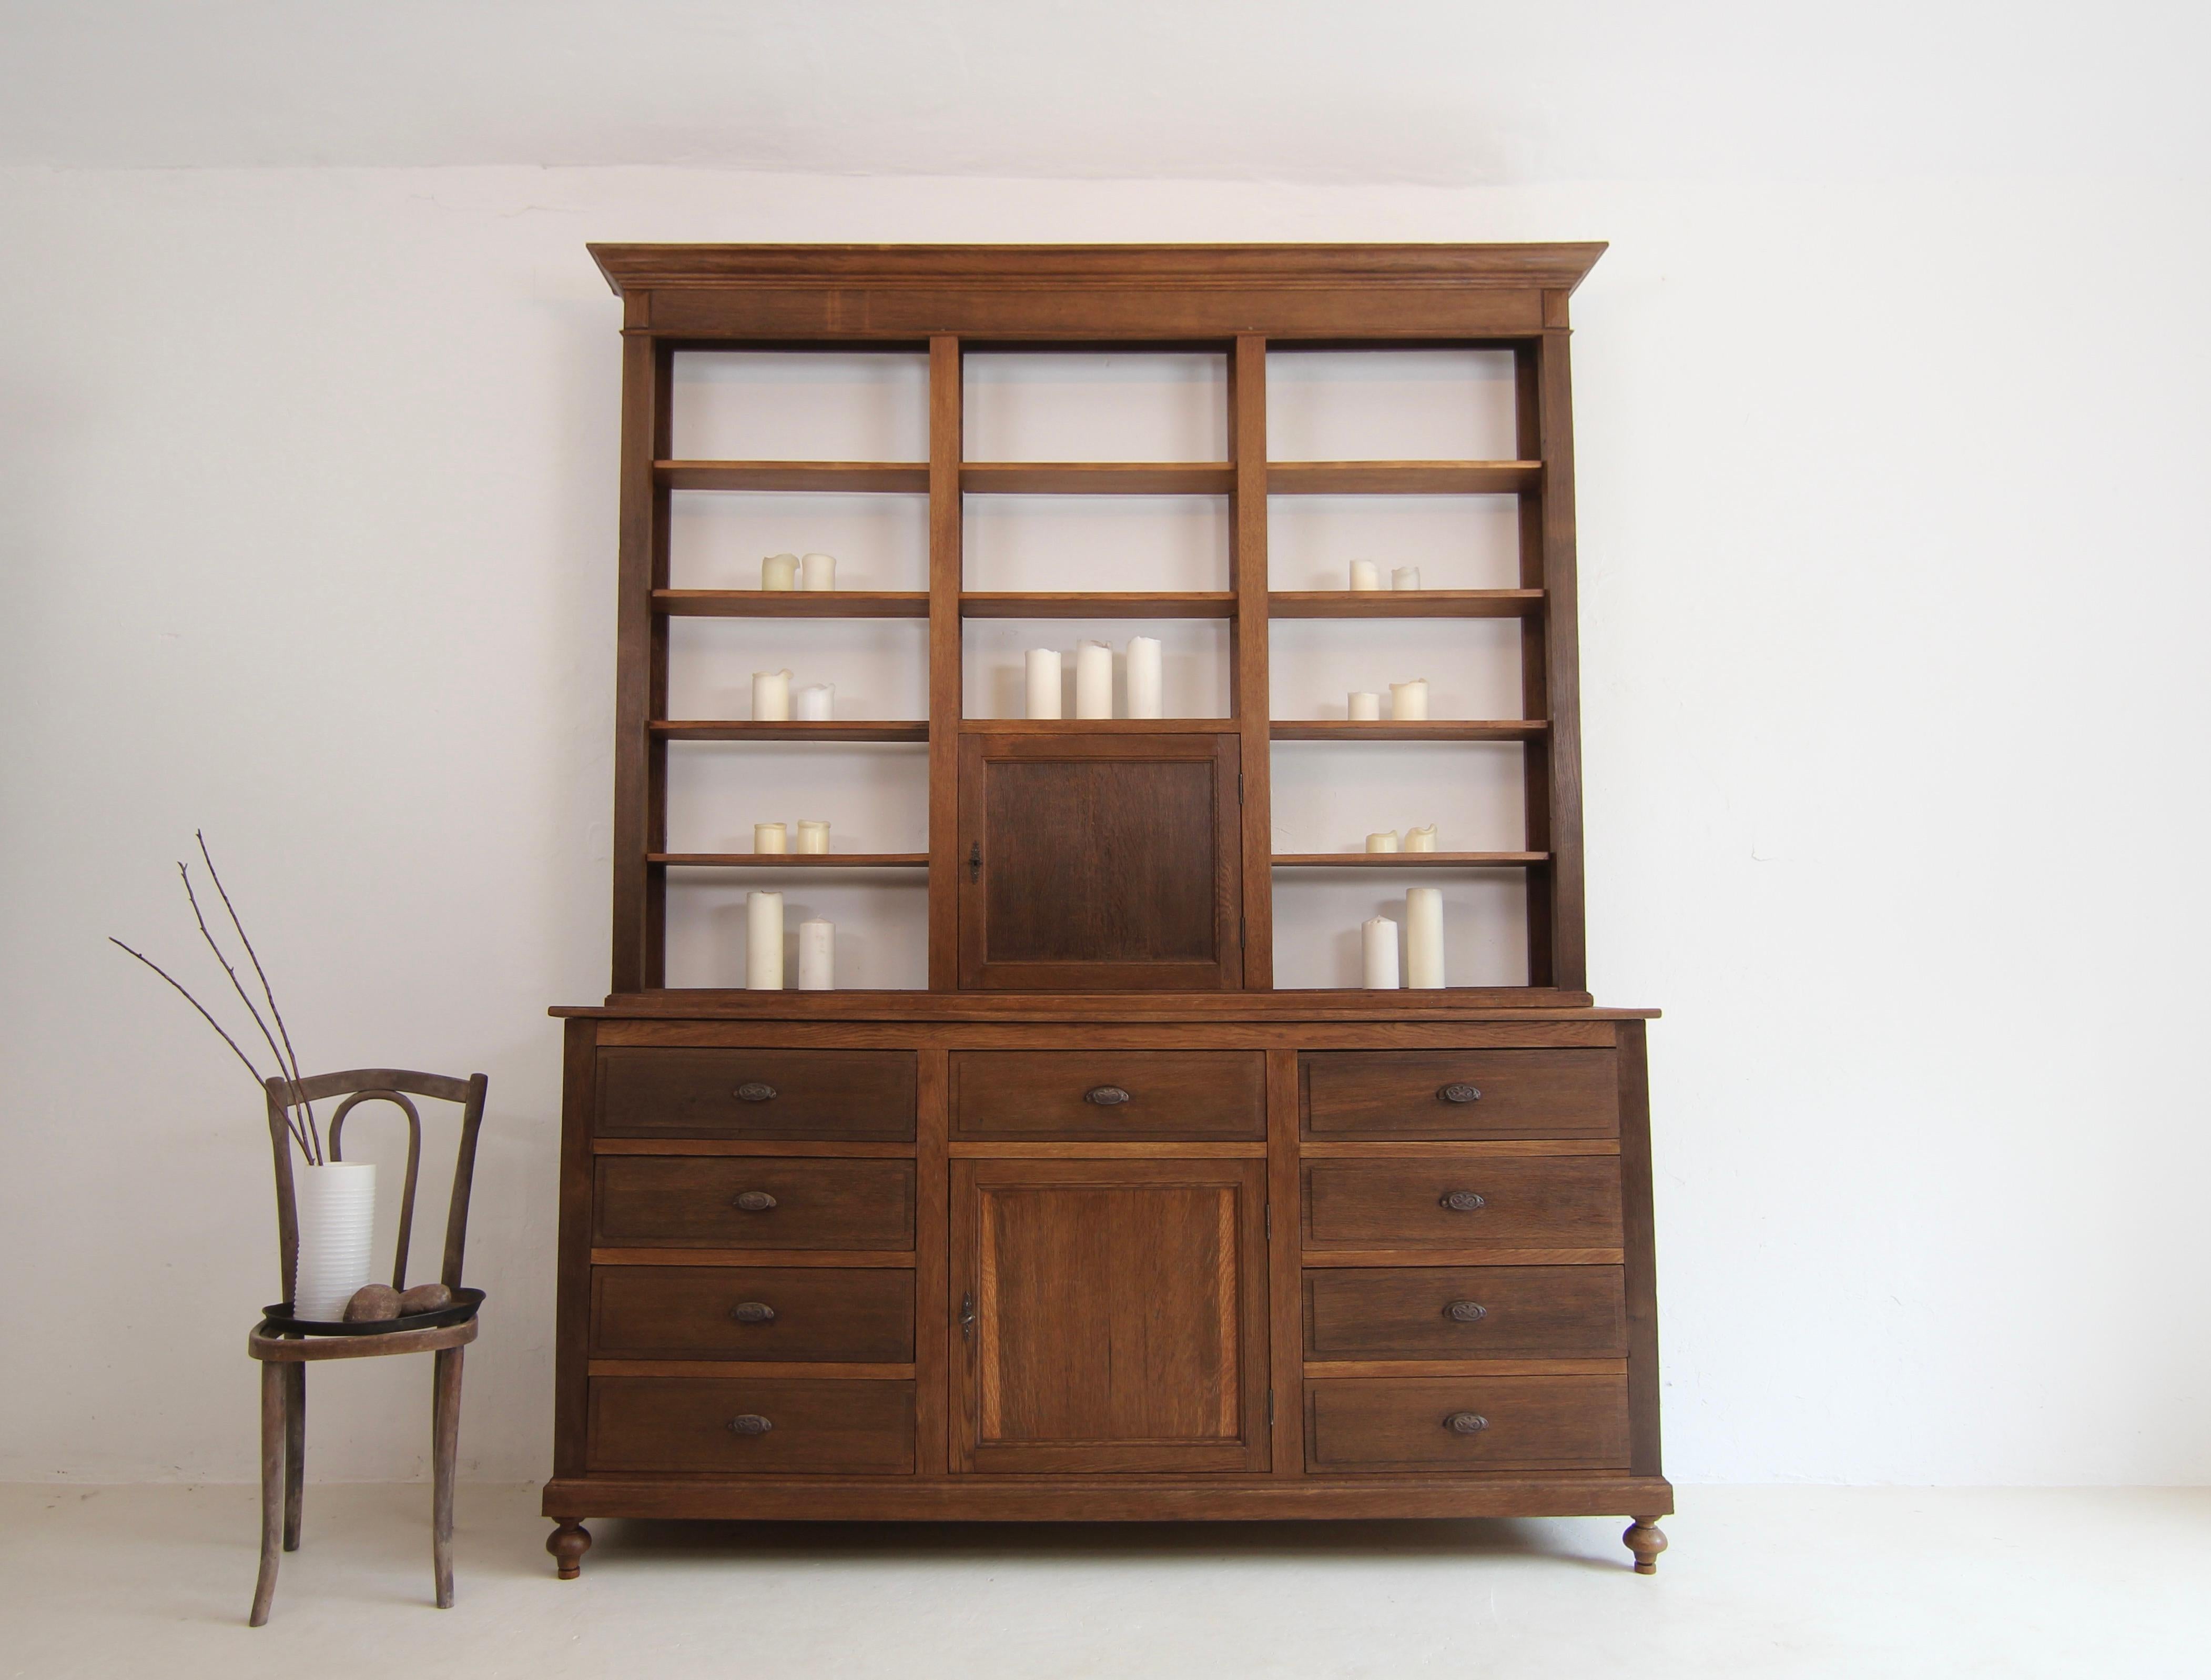 A authentic German or Belgian apothecary's shop cabinet from around 1900.

Two-part side-moulded oak body consisting of base and shelf unit.

The base cabinet has a door and 9 drawers under a slightly protruding top panel. The flat open shelf with